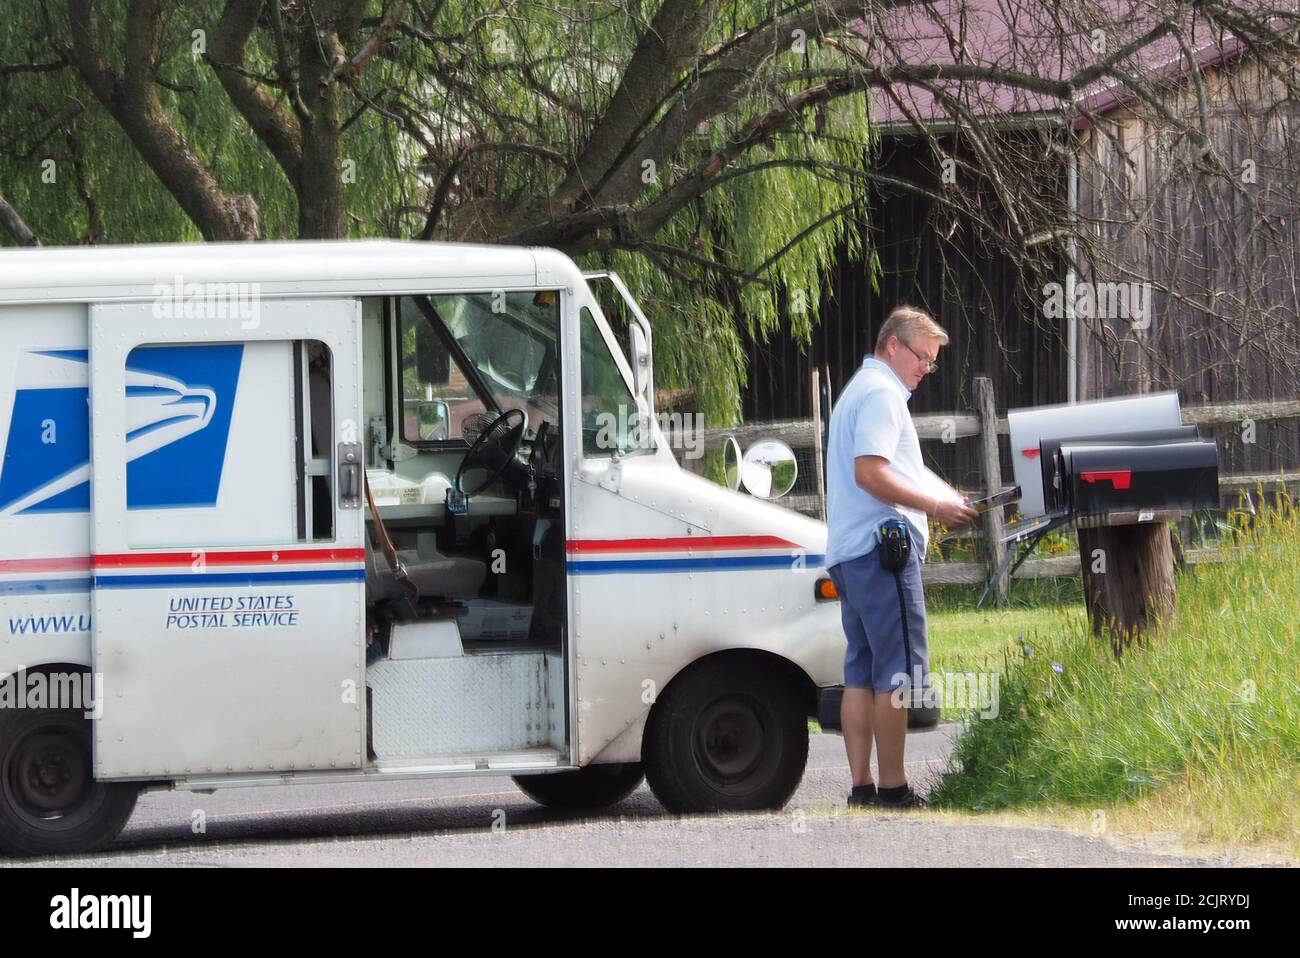 The postman is delivering the mail and is standing by the truck. Stock Photo